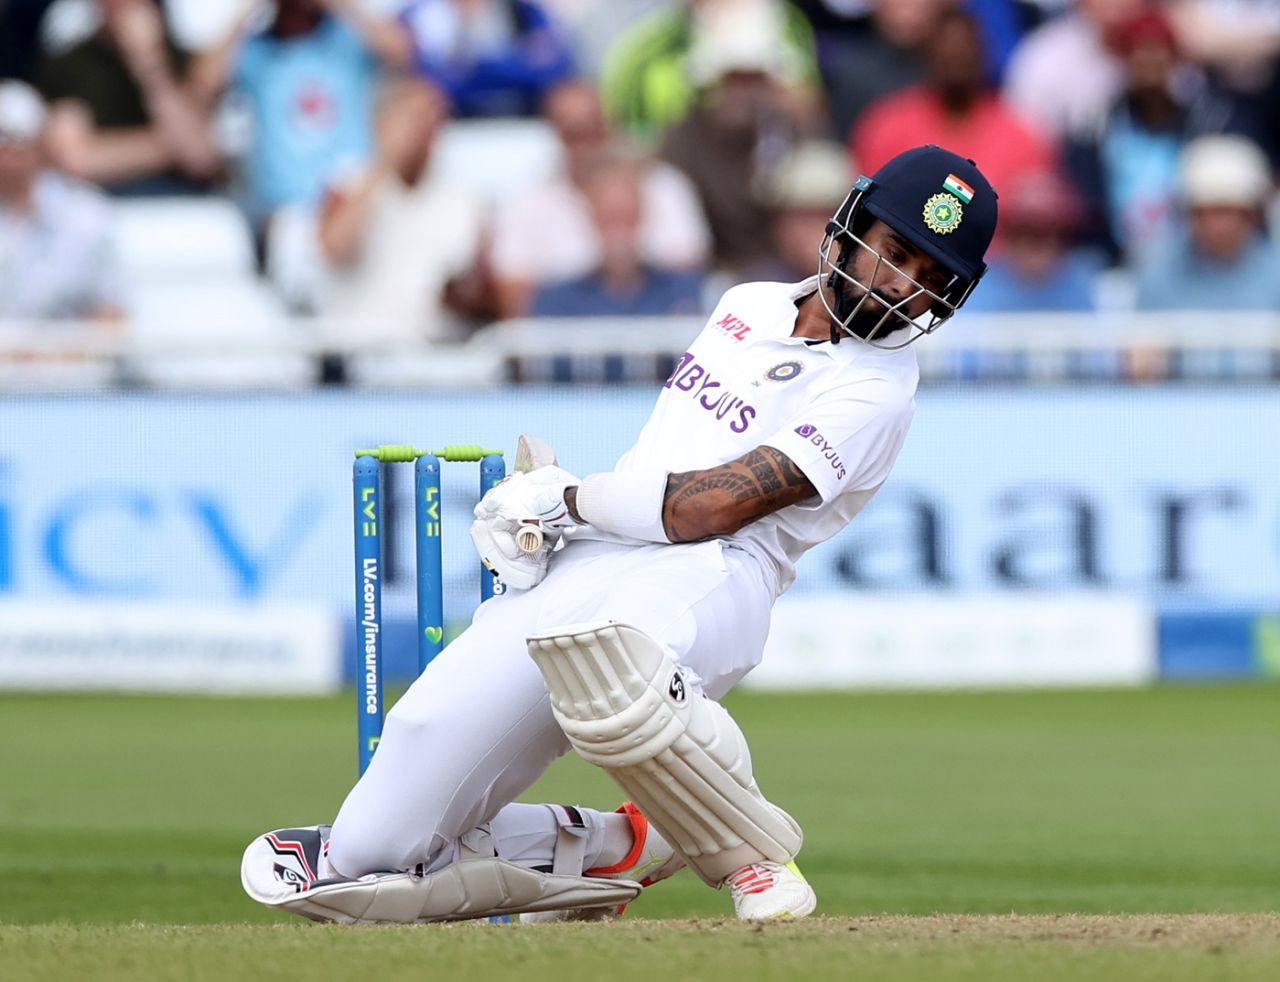 KL Rahul sways away from a bouncer, England vs India, 1st Test, Nottingham, 2nd day, August 5, 2021